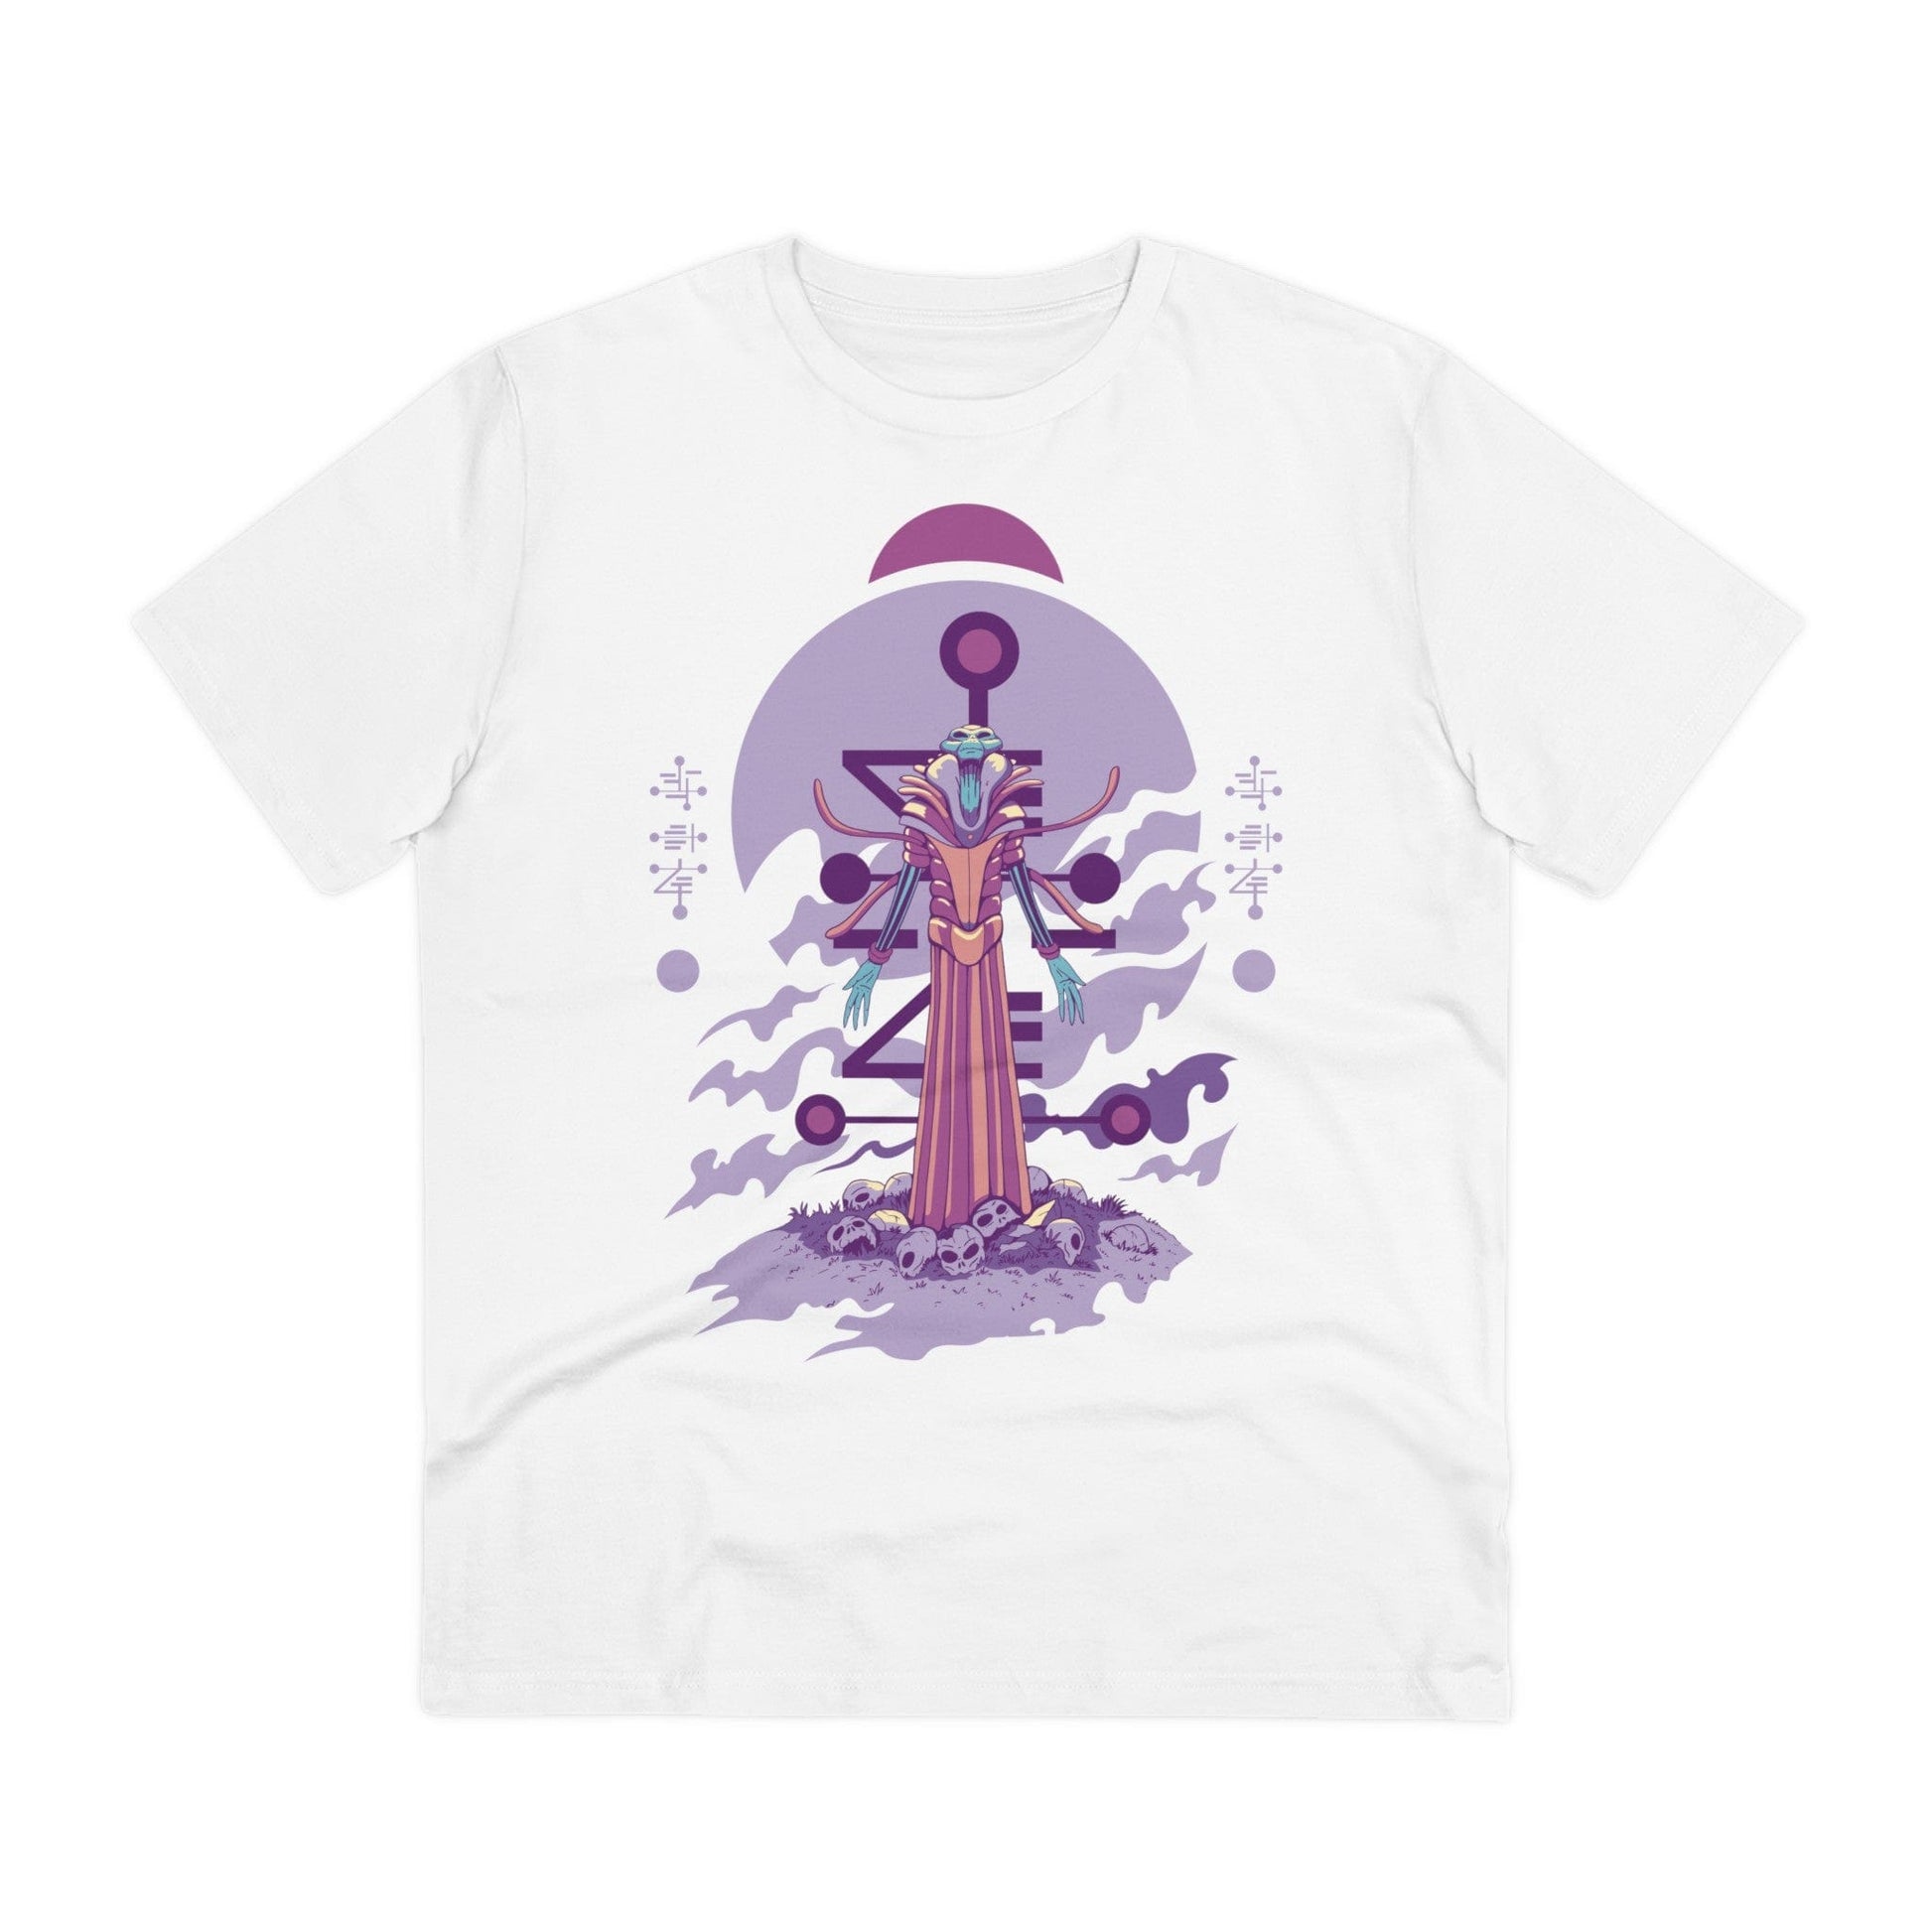 Printify T-Shirt White / 2XS Standing Alien with open arms - Alien Warrior - Front Design